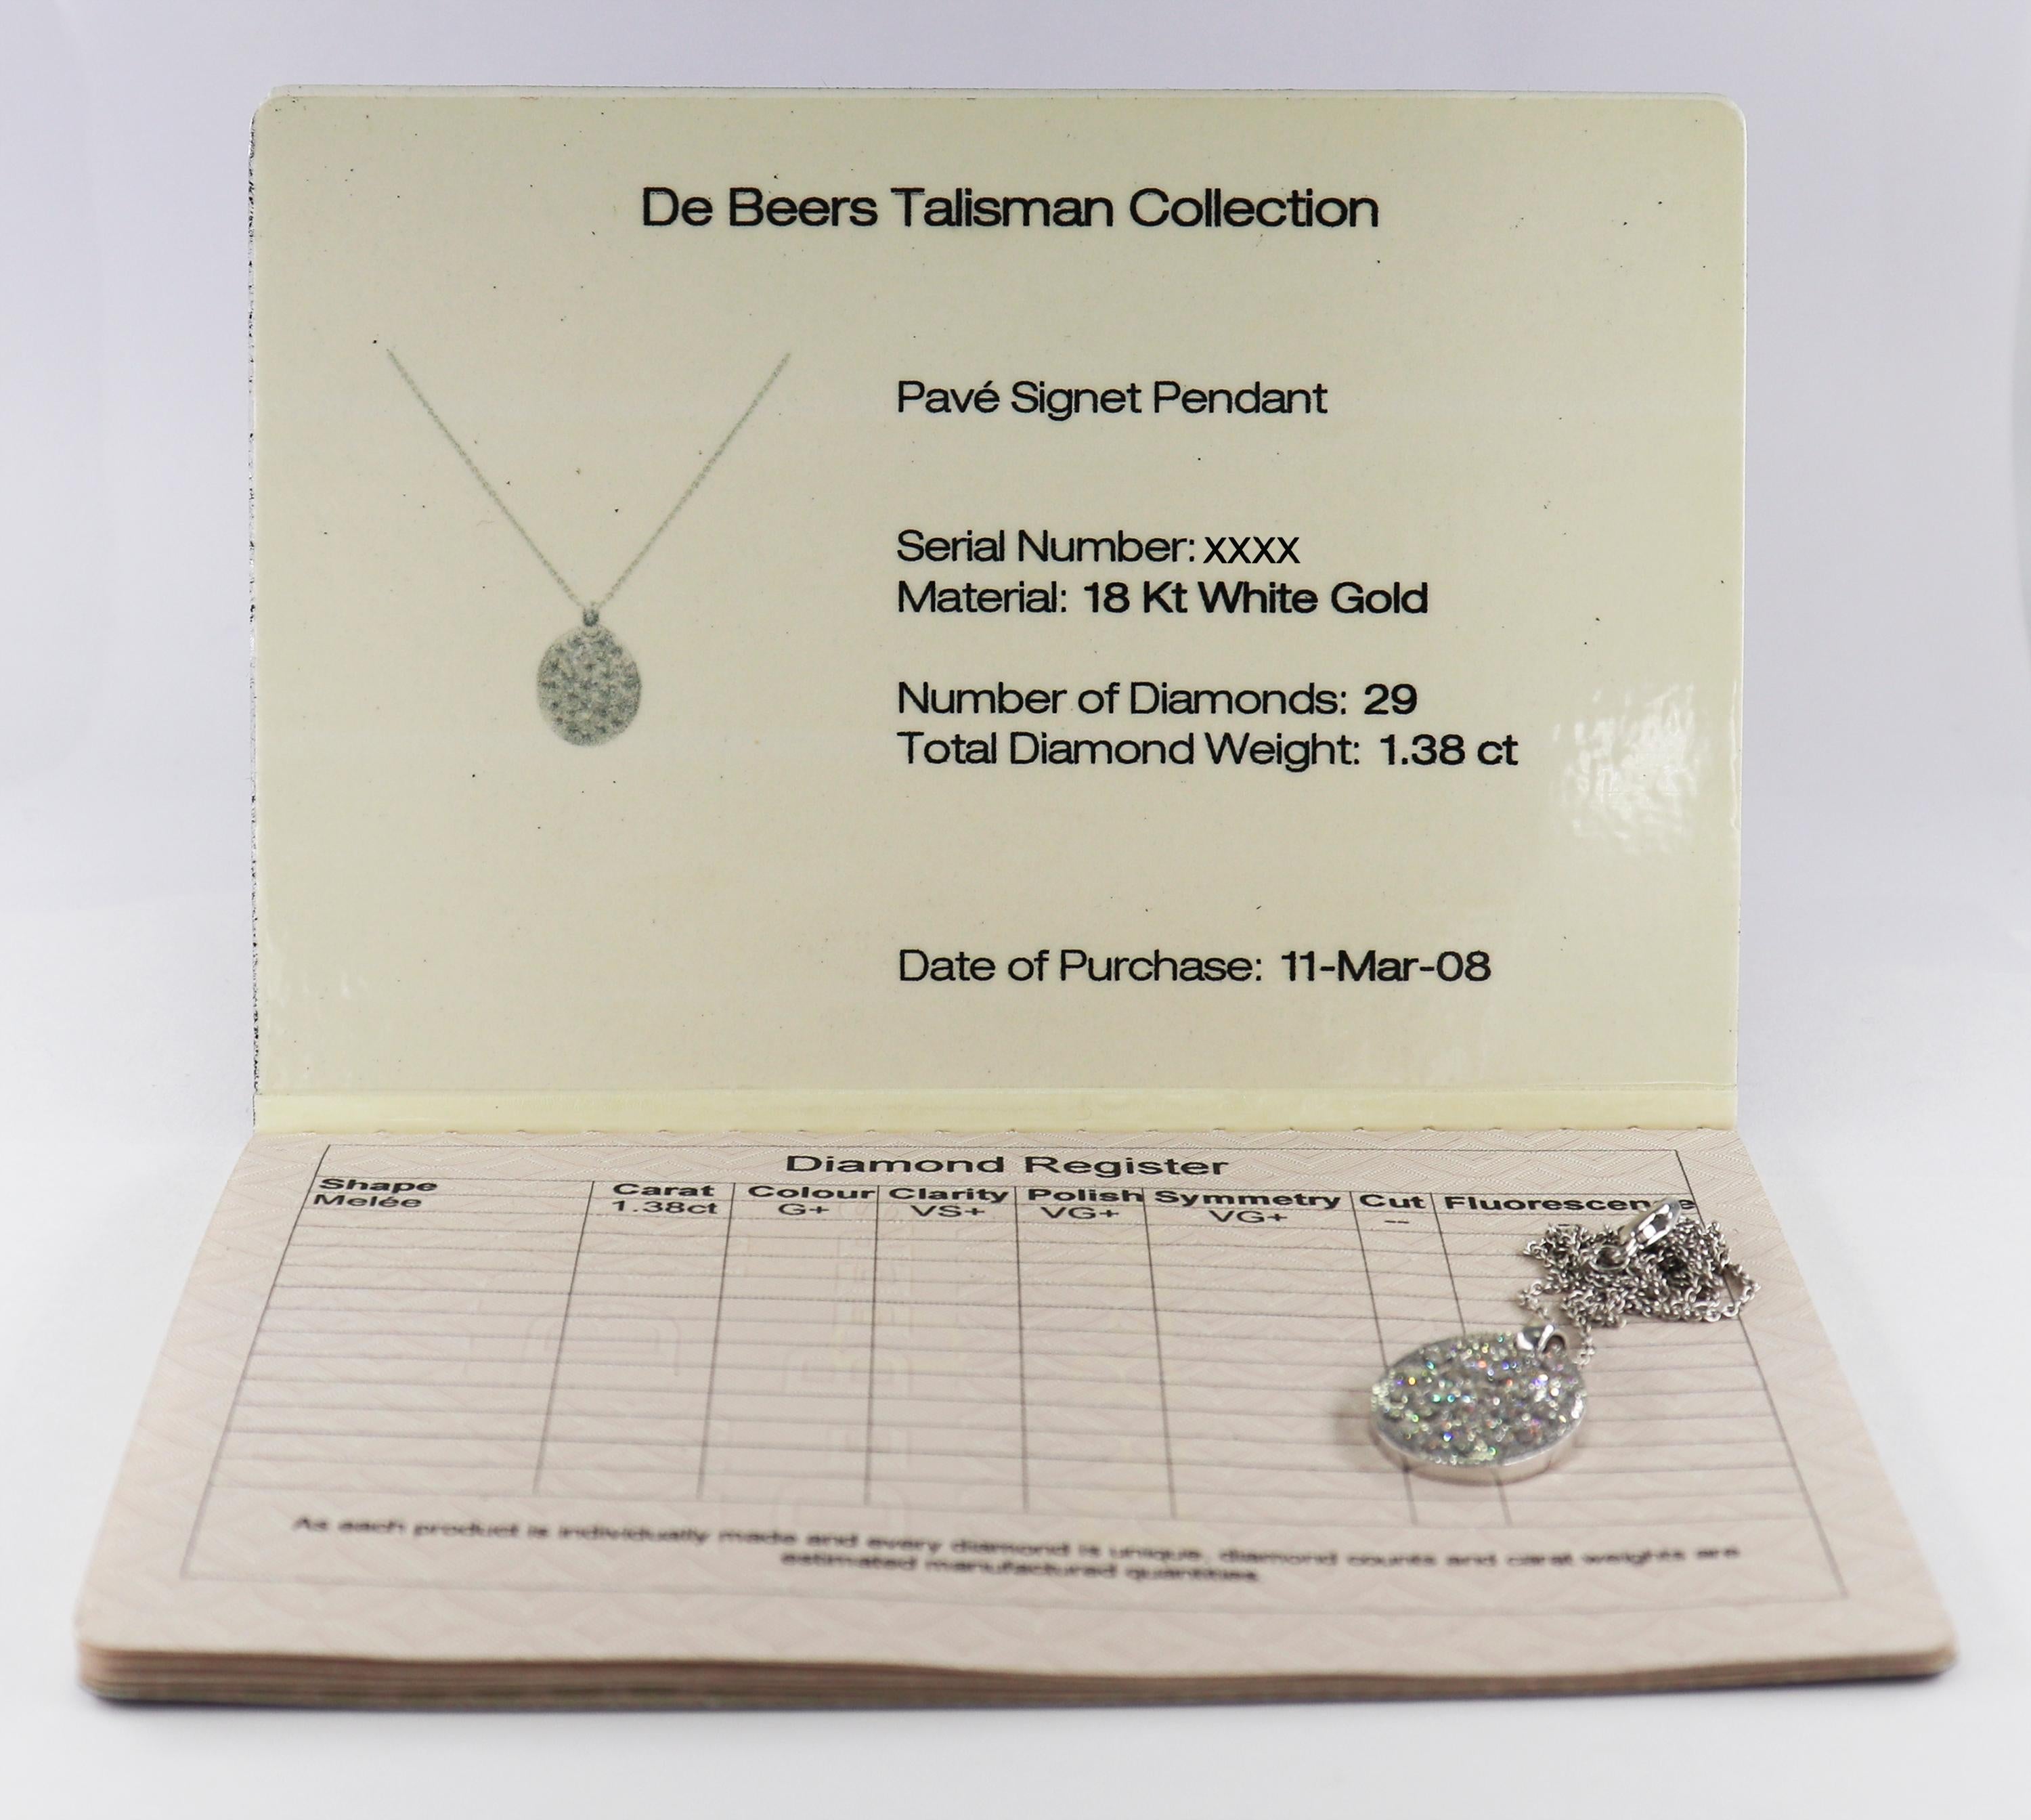 Round Cut De Beers Talisman Collection Diamond Pendant Necklace = 1.38 Carat Total Weight